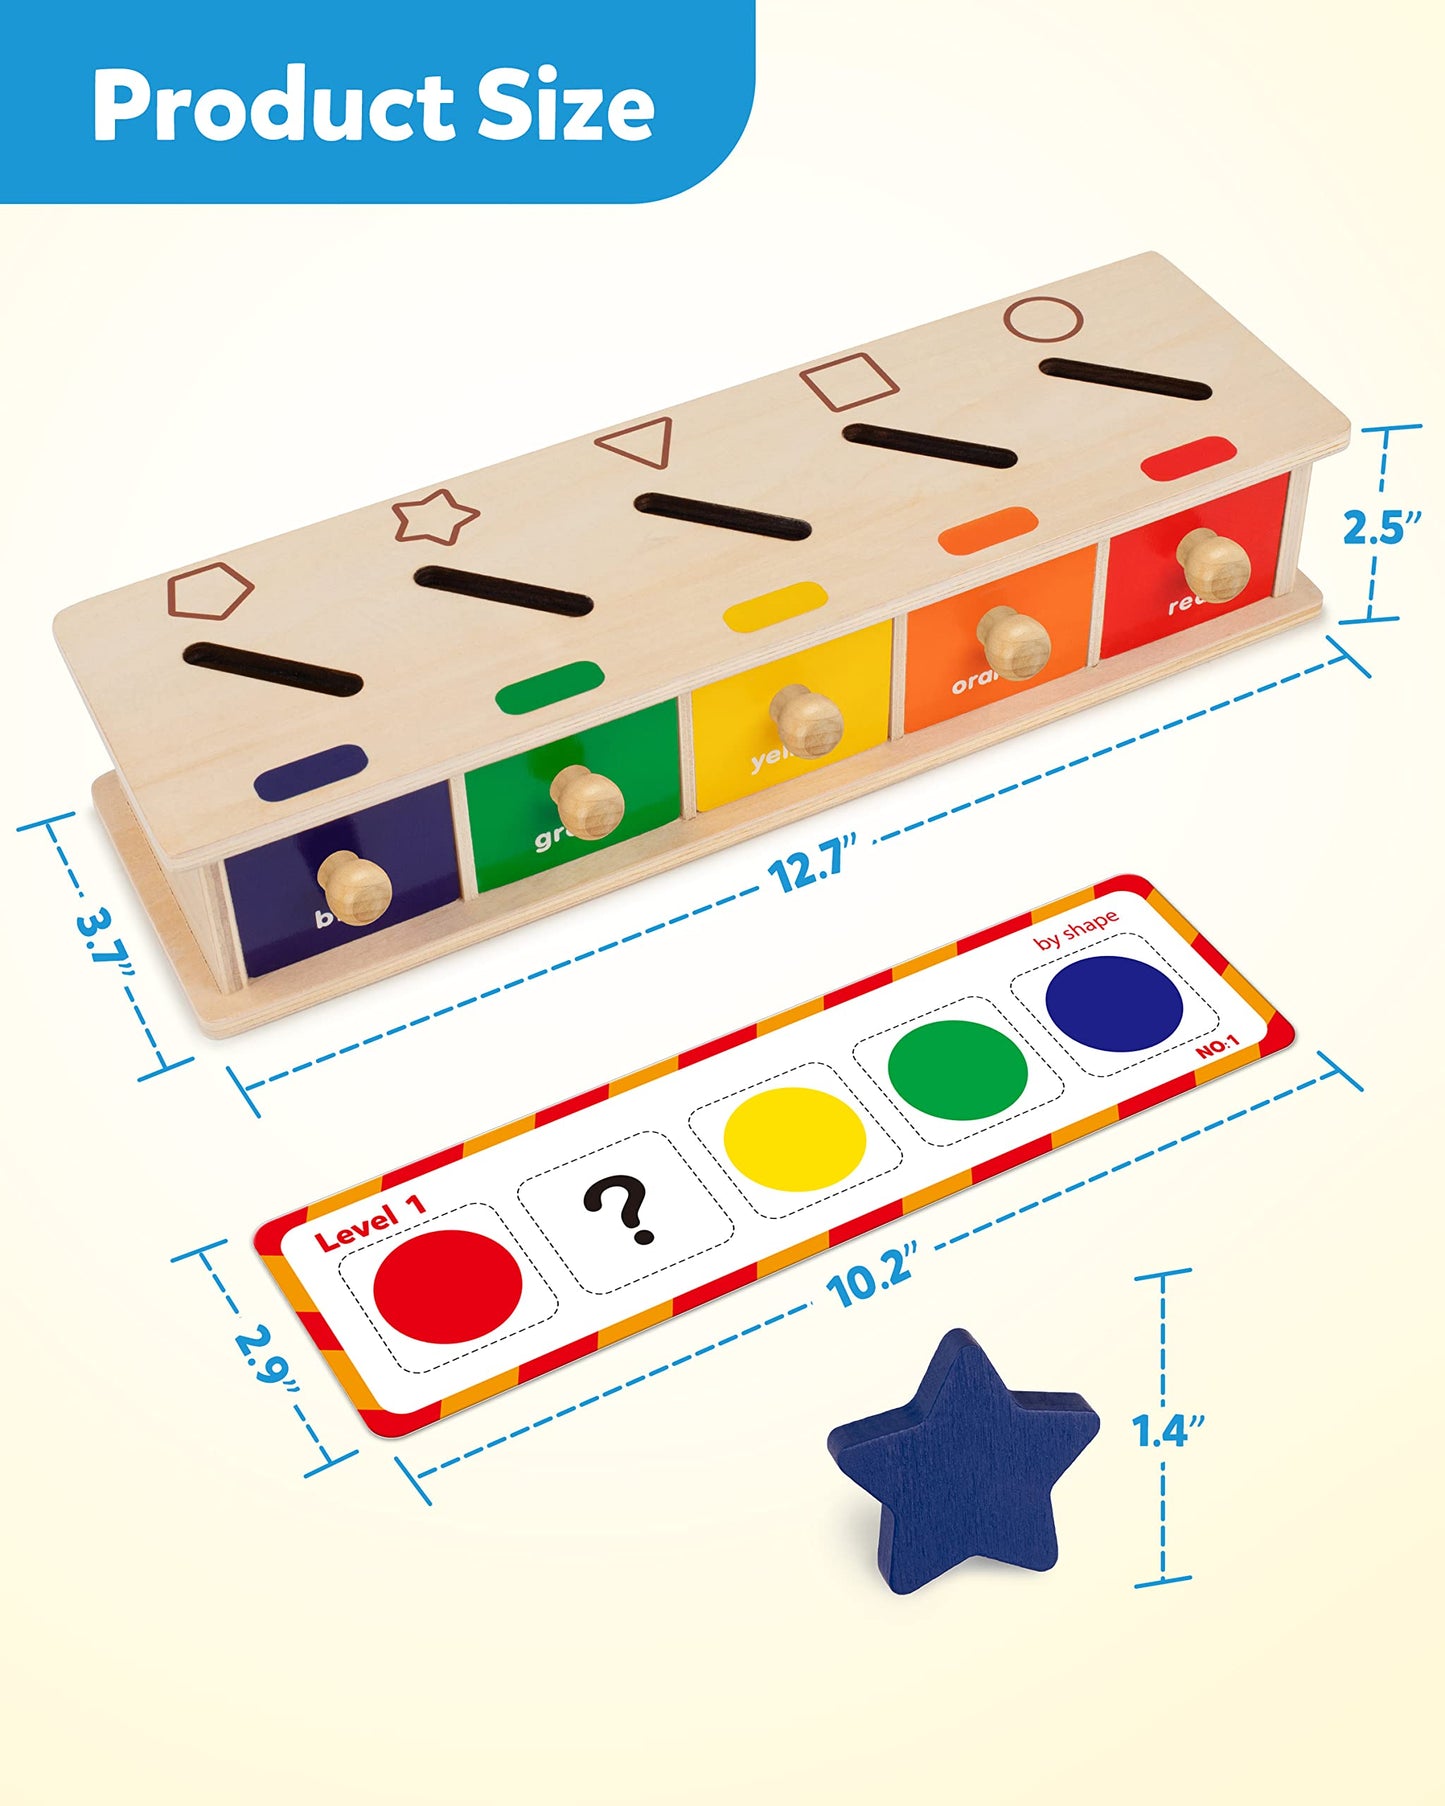 Coogam Montessori Toys Wooden Color Shape Sorting Box Game Geometric Matching Blocks Early Learning Educational Toy Gift for 3 4 5 Year-Old Baby Toddlers